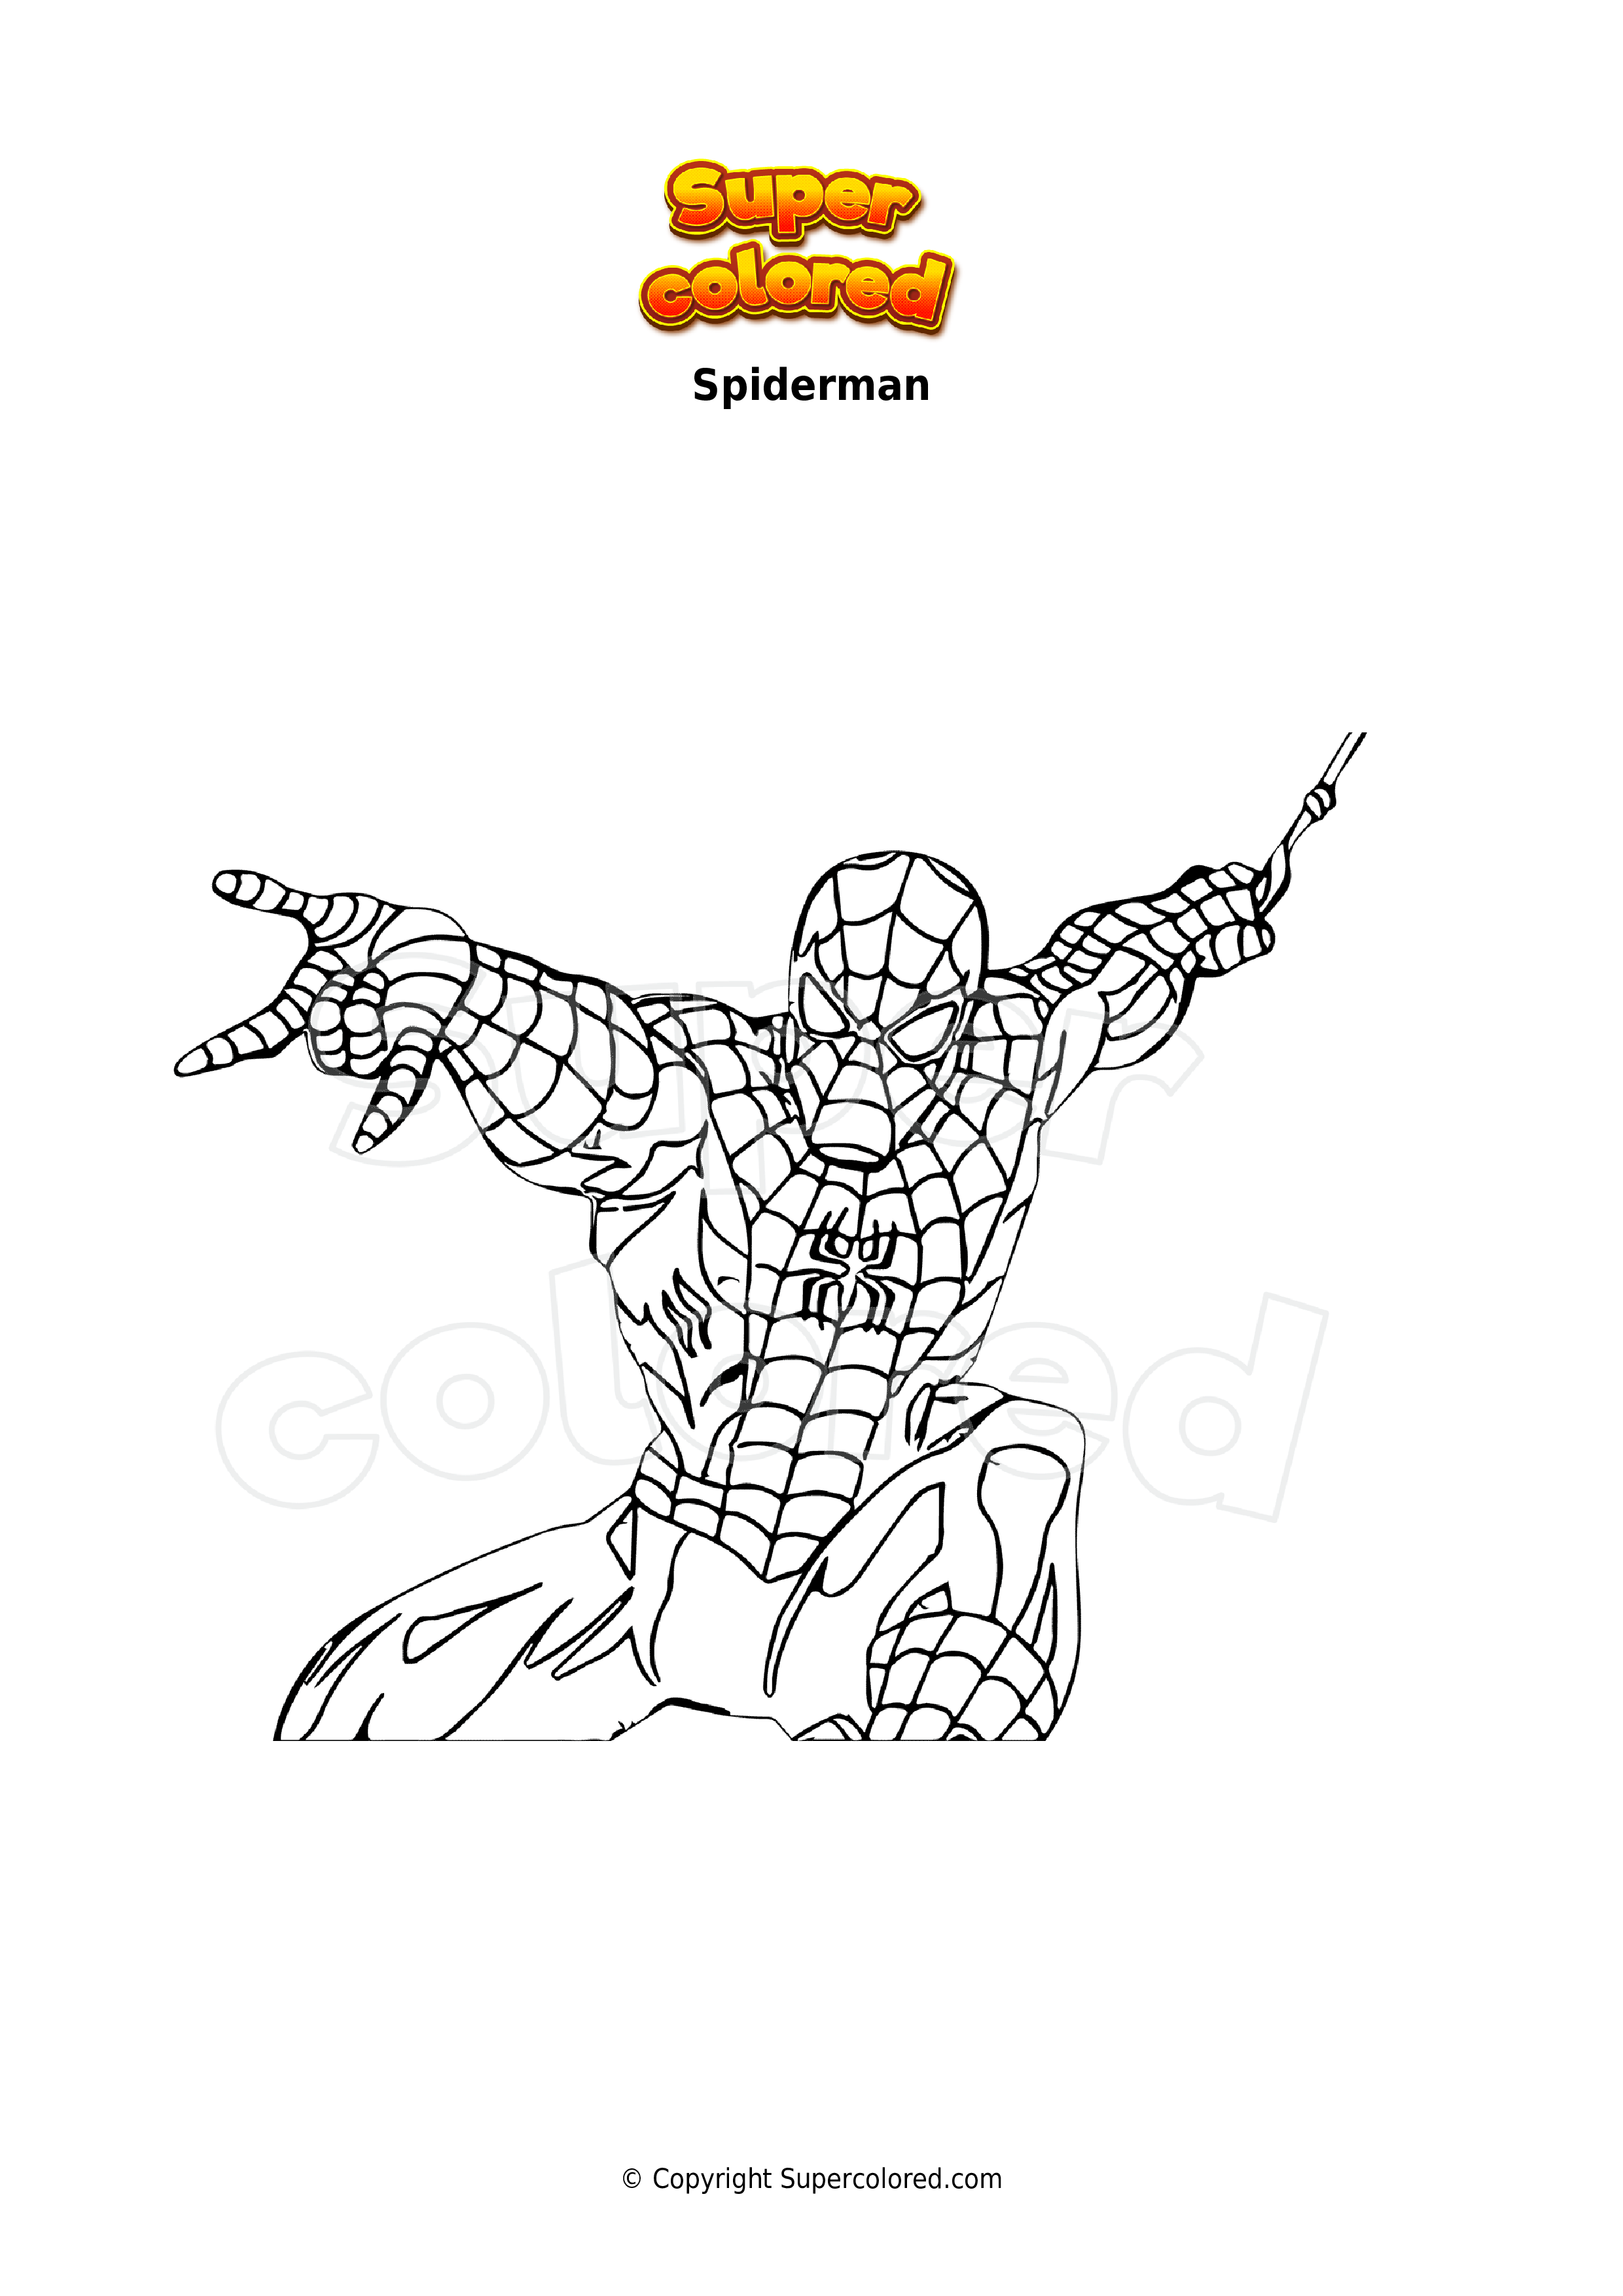 Coloring Pages - Spiderman - Supercolored